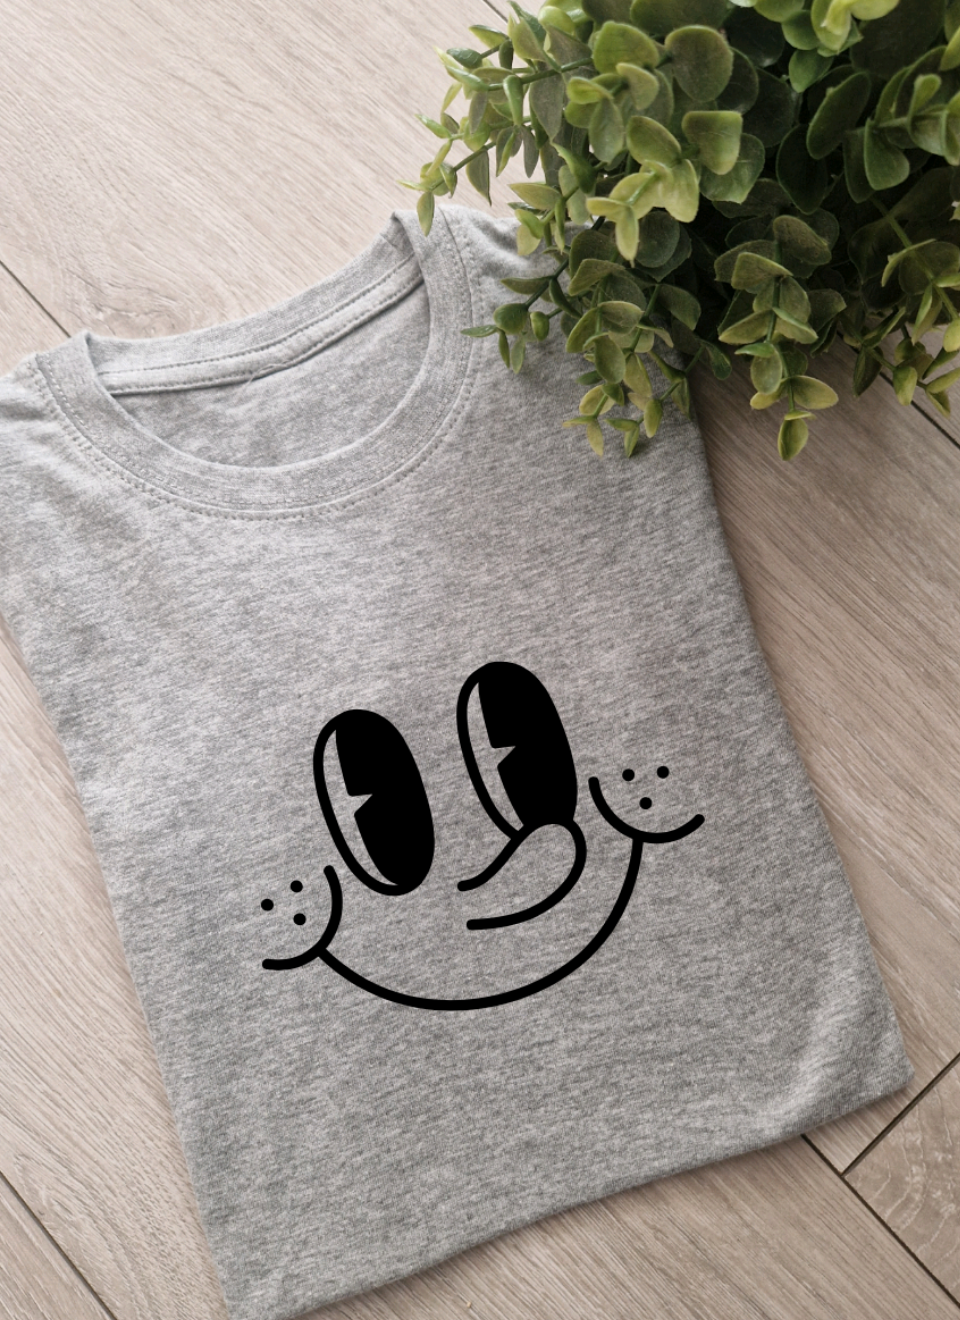 Freckle face Adults and Childs Tshirt